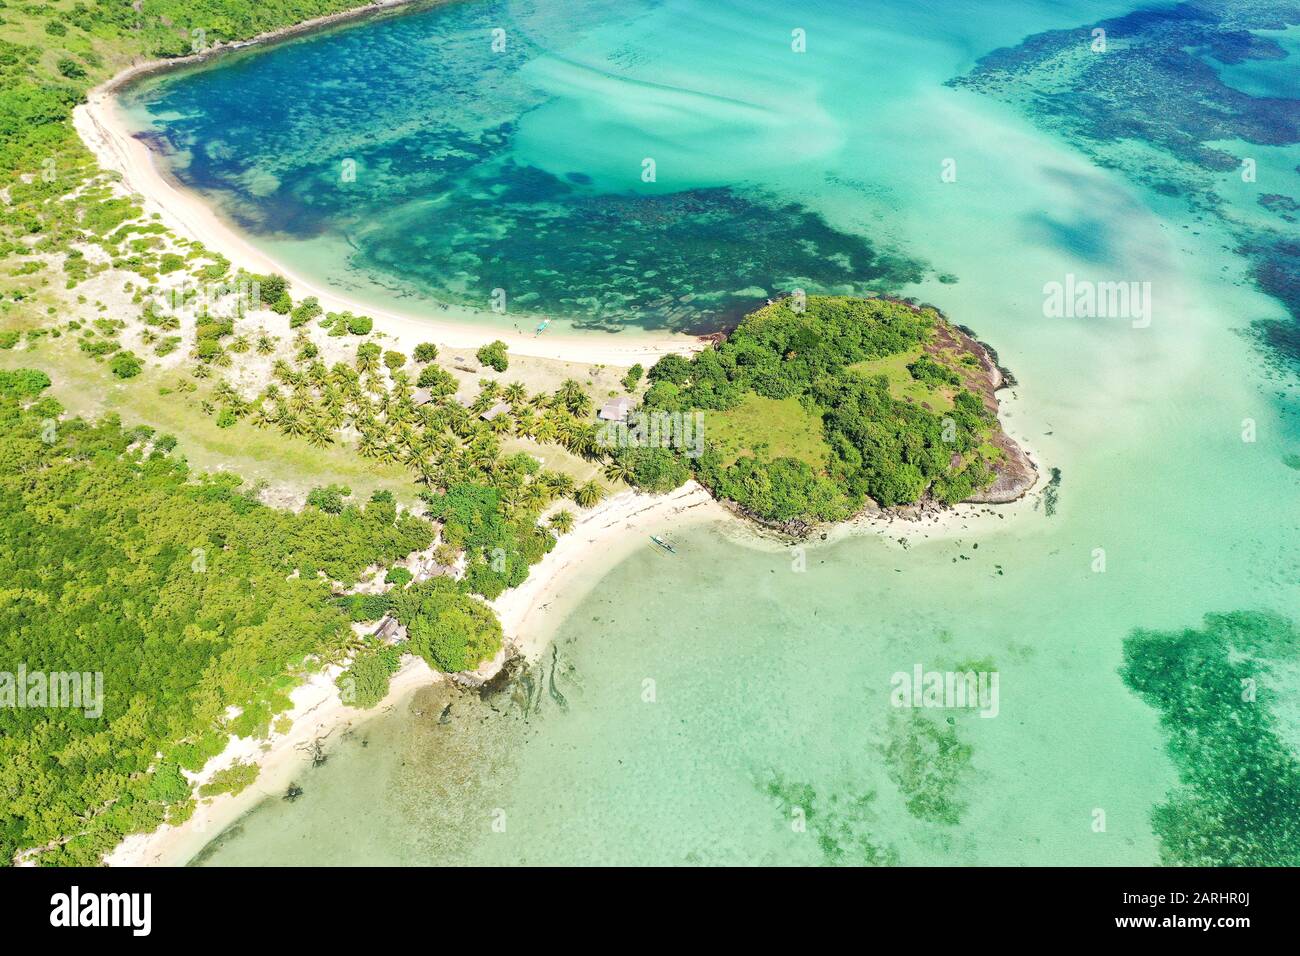 A lagoon with a coral reef and a white sandy beach, a view from above. The coast of a tropical island. Summer and travel vacation concept. Caramoan Islands, Philippines. Stock Photo